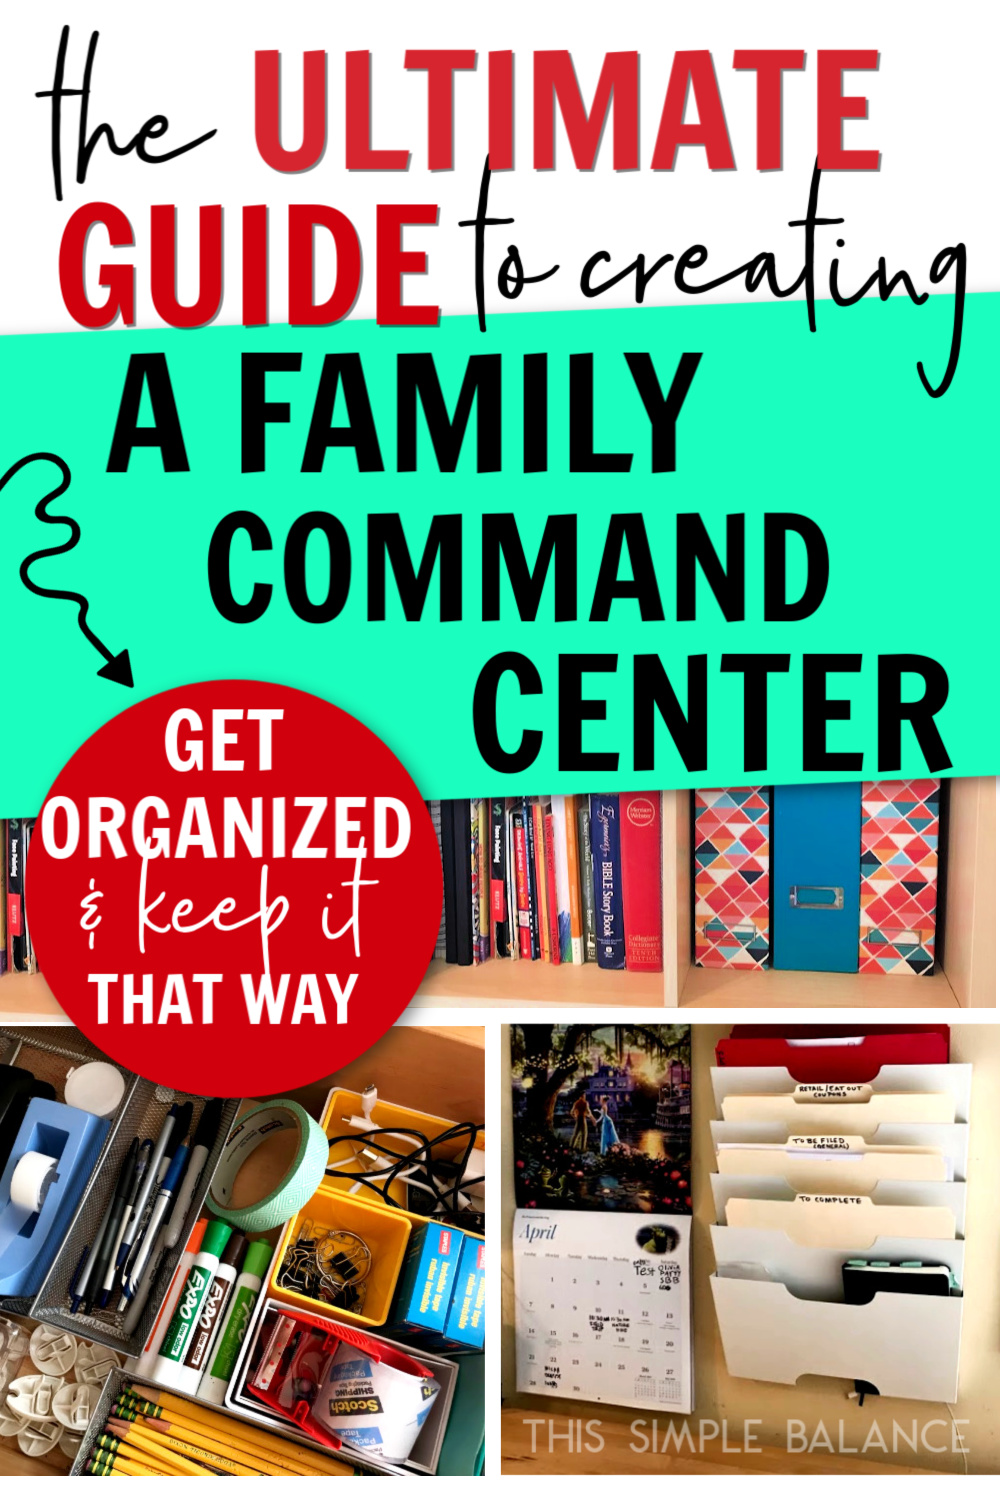 file folders, books on shelf, calendar, home office supplies in drawer, with text overlay, "the ultimate guide to creating a family command center, get organized & keep it that way"  